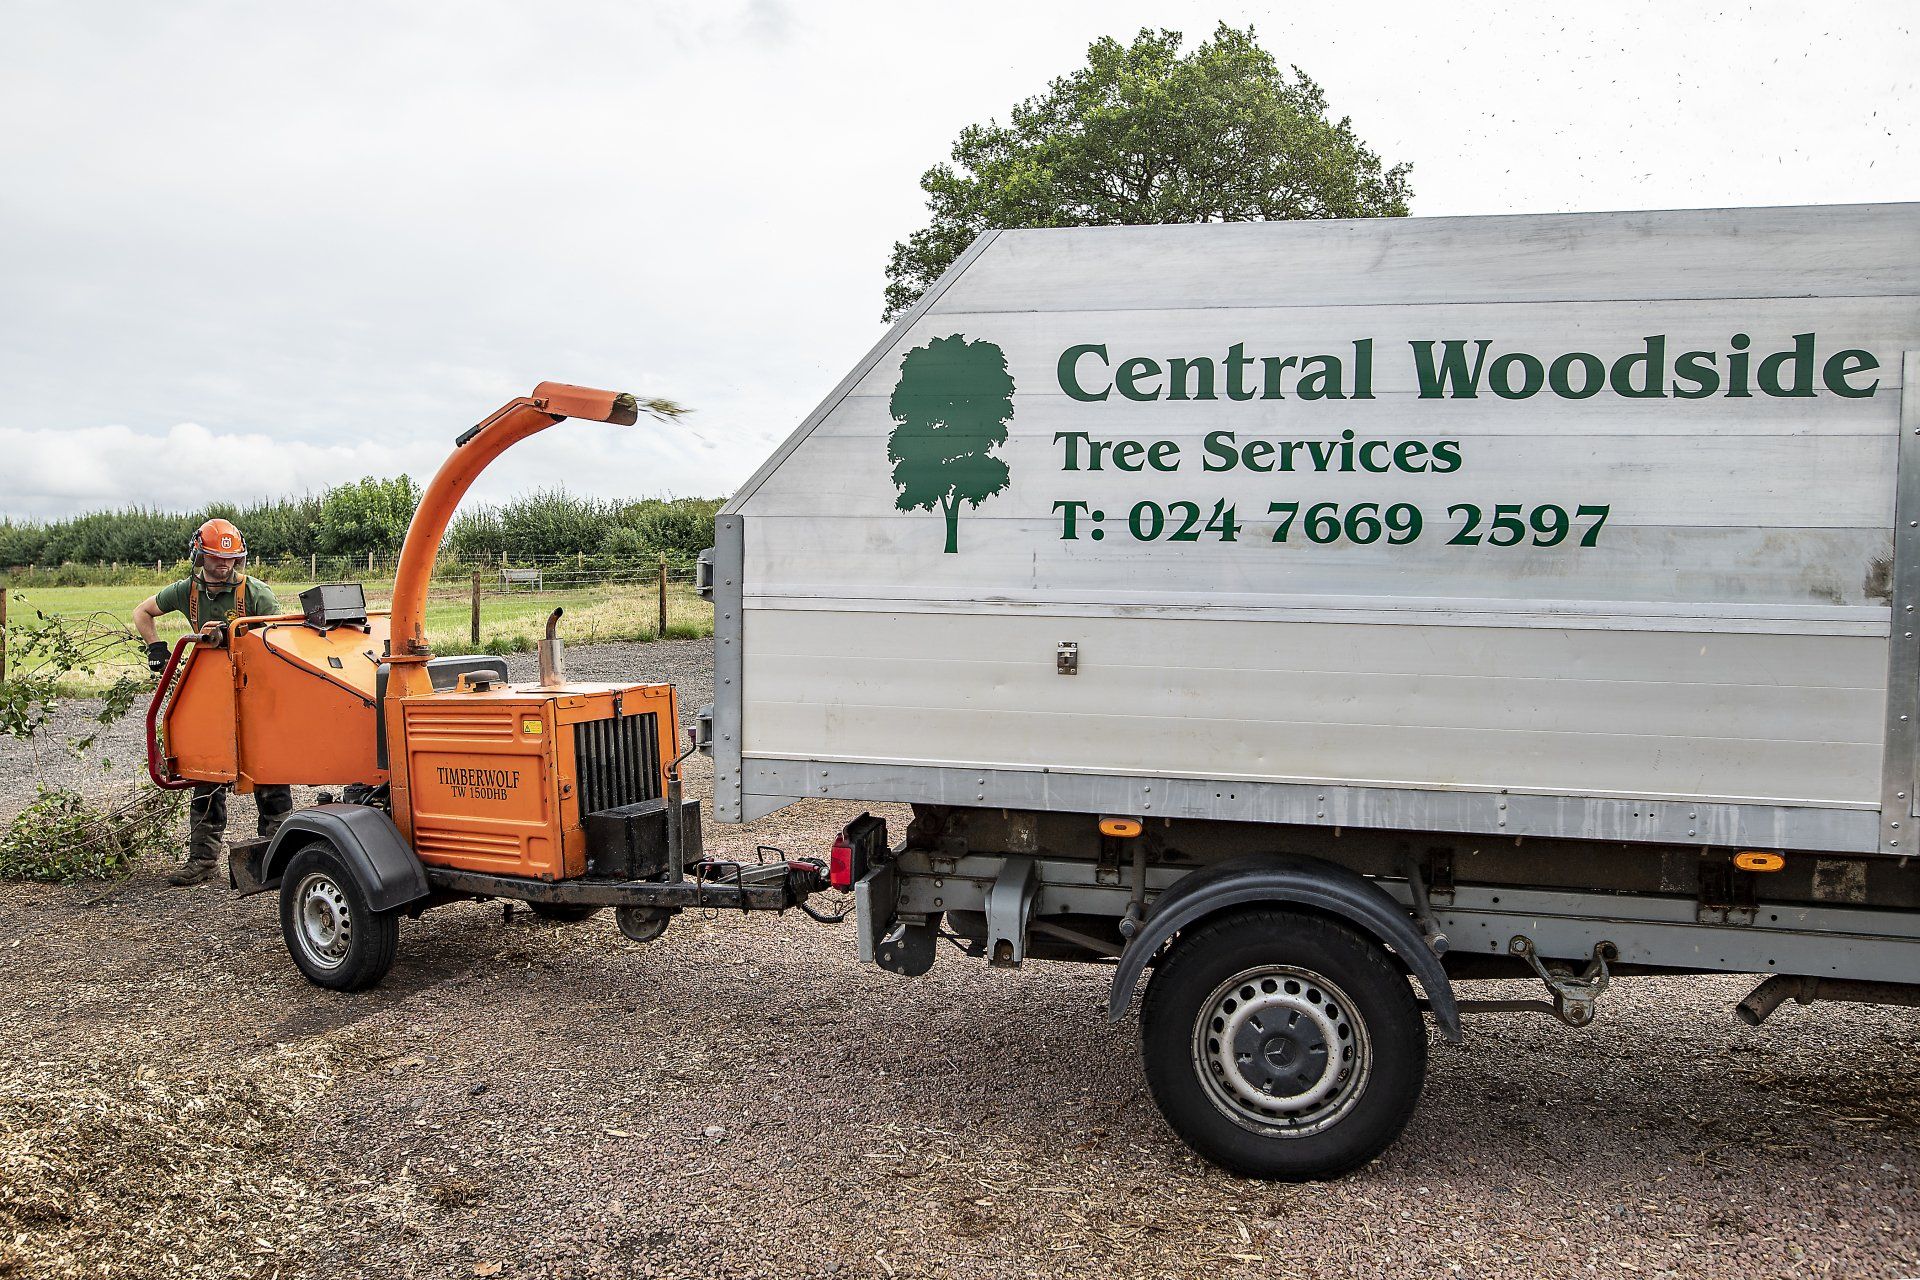 Central Woodside Tree Services woodchipper